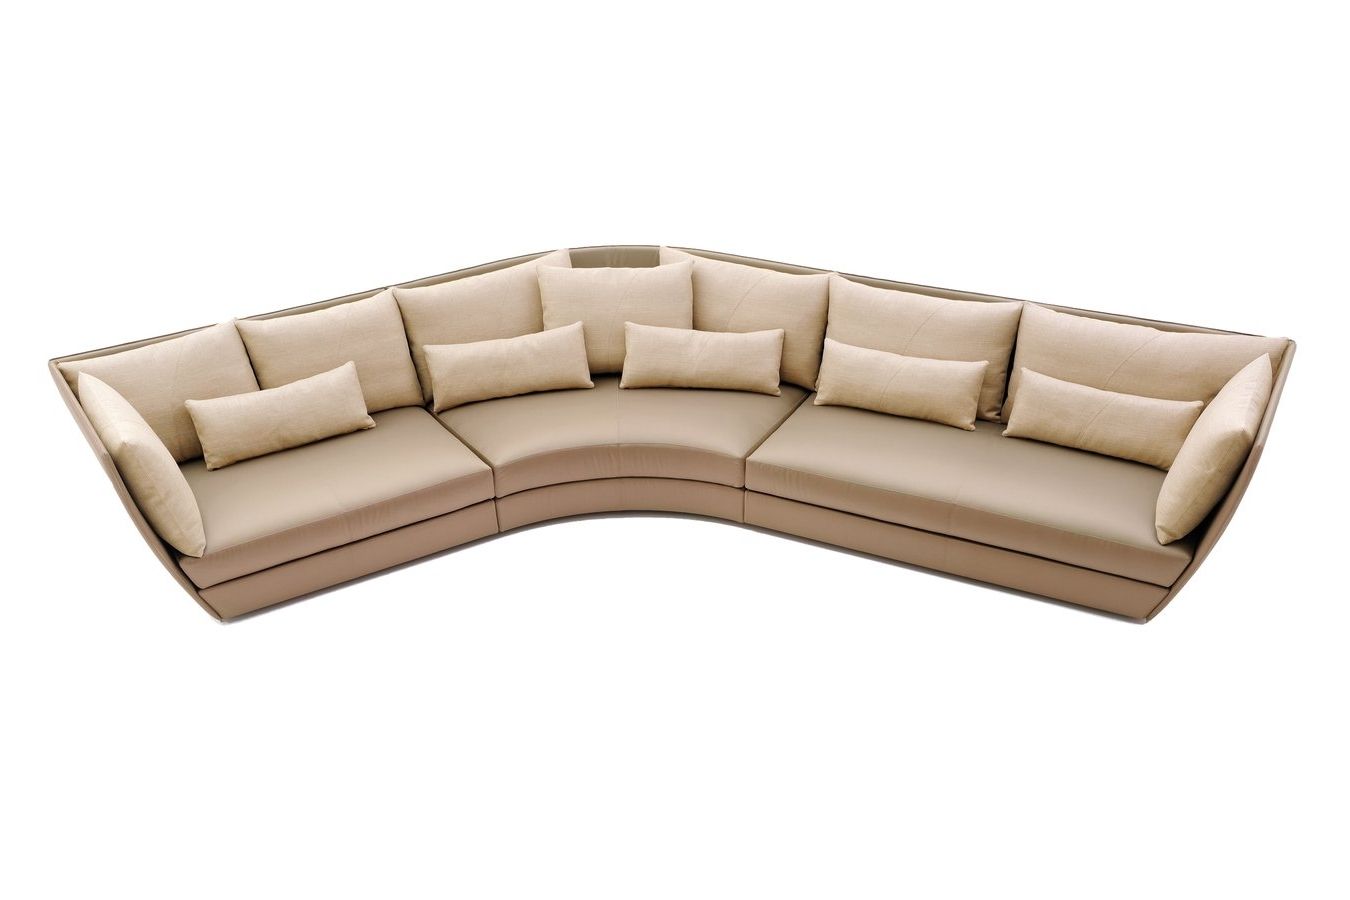 Ecc Regarding Best And Newest Nz Sectional Sofas (View 1 of 15)